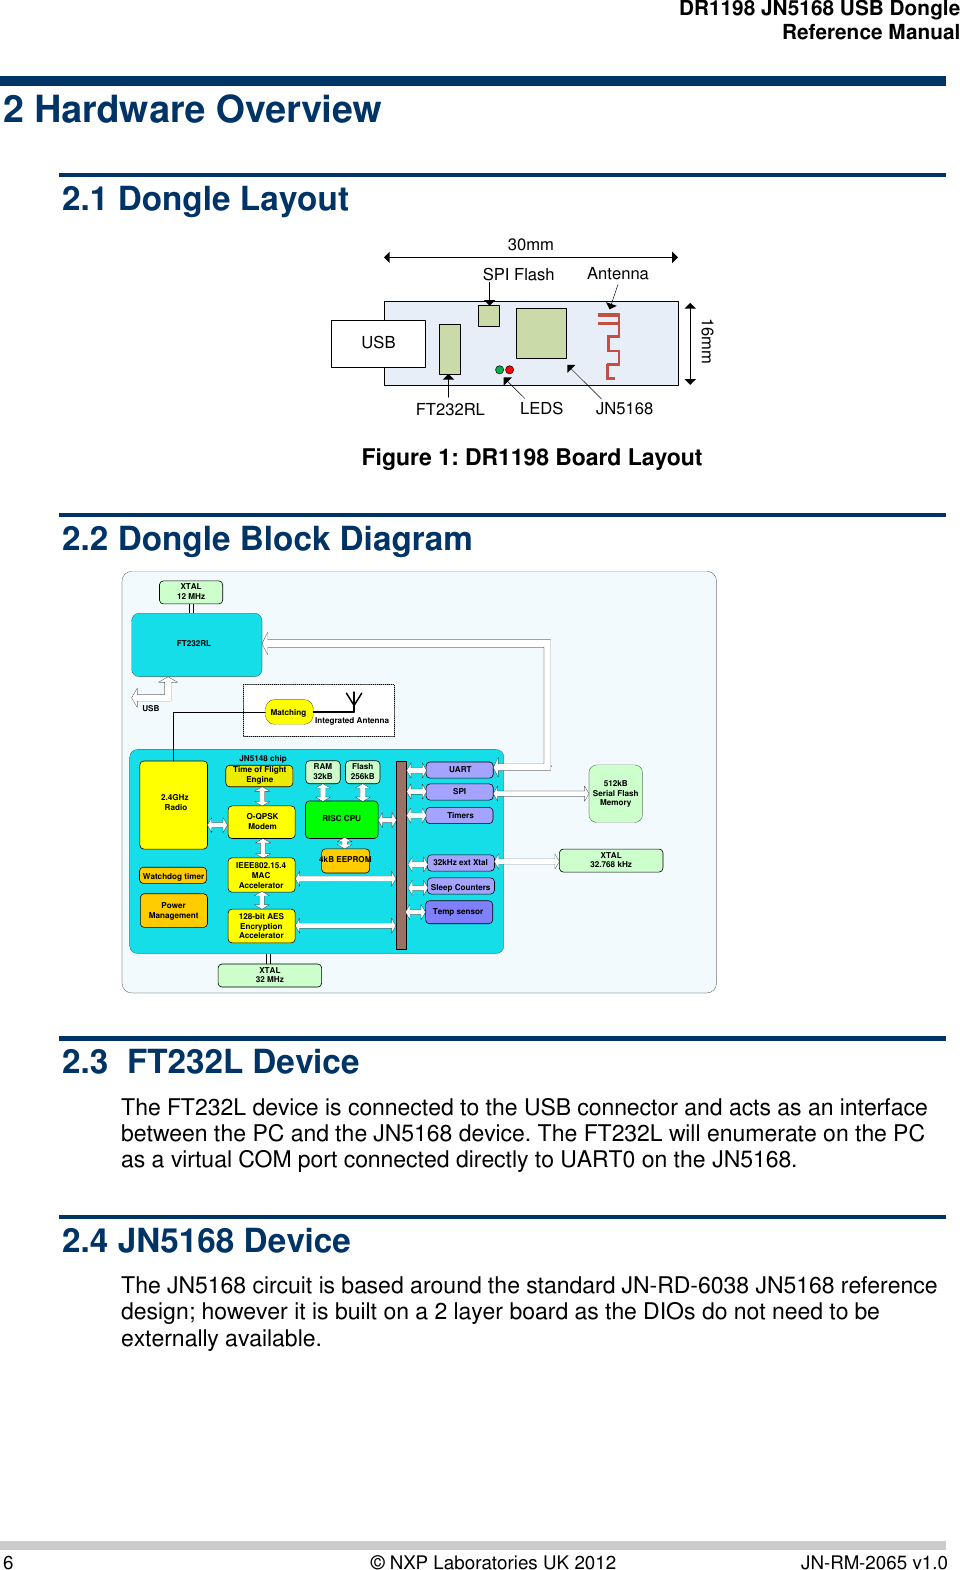    DR1198 JN5168 USB Dongle  Reference Manual  6  © NXP Laboratories UK 2012  JN-RM-2065 v1.0 2 Hardware Overview 2.1 Dongle Layout 16mm30mmUSBJN5168LEDSFT232RLAntennaSPI Flash Figure 1: DR1198 Board Layout 2.2 Dongle Block Diagram TimersUARTTemp sensorSPIRAM32kB128-bit AESEncryptionAccelerator2.4GHz RadioFlash256kBRISC CPUPowerManagementXTAL32.768 kHzO-QPSKModemIEEE802.15.4MAC Accelerator512kB Serial Flash MemoryJN5148 chipIntegrated Antenna32kHz ext XtalSleep Counters4kB EEPROMWatchdog timerTime of FlightEngineUSBFT232RLXTAL32 MHzXTAL12 MHzMatching 2.3  FT232L Device The FT232L device is connected to the USB connector and acts as an interface between the PC and the JN5168 device. The FT232L will enumerate on the PC as a virtual COM port connected directly to UART0 on the JN5168. 2.4 JN5168 Device The JN5168 circuit is based around the standard JN-RD-6038 JN5168 reference design; however it is built on a 2 layer board as the DIOs do not need to be externally available.   